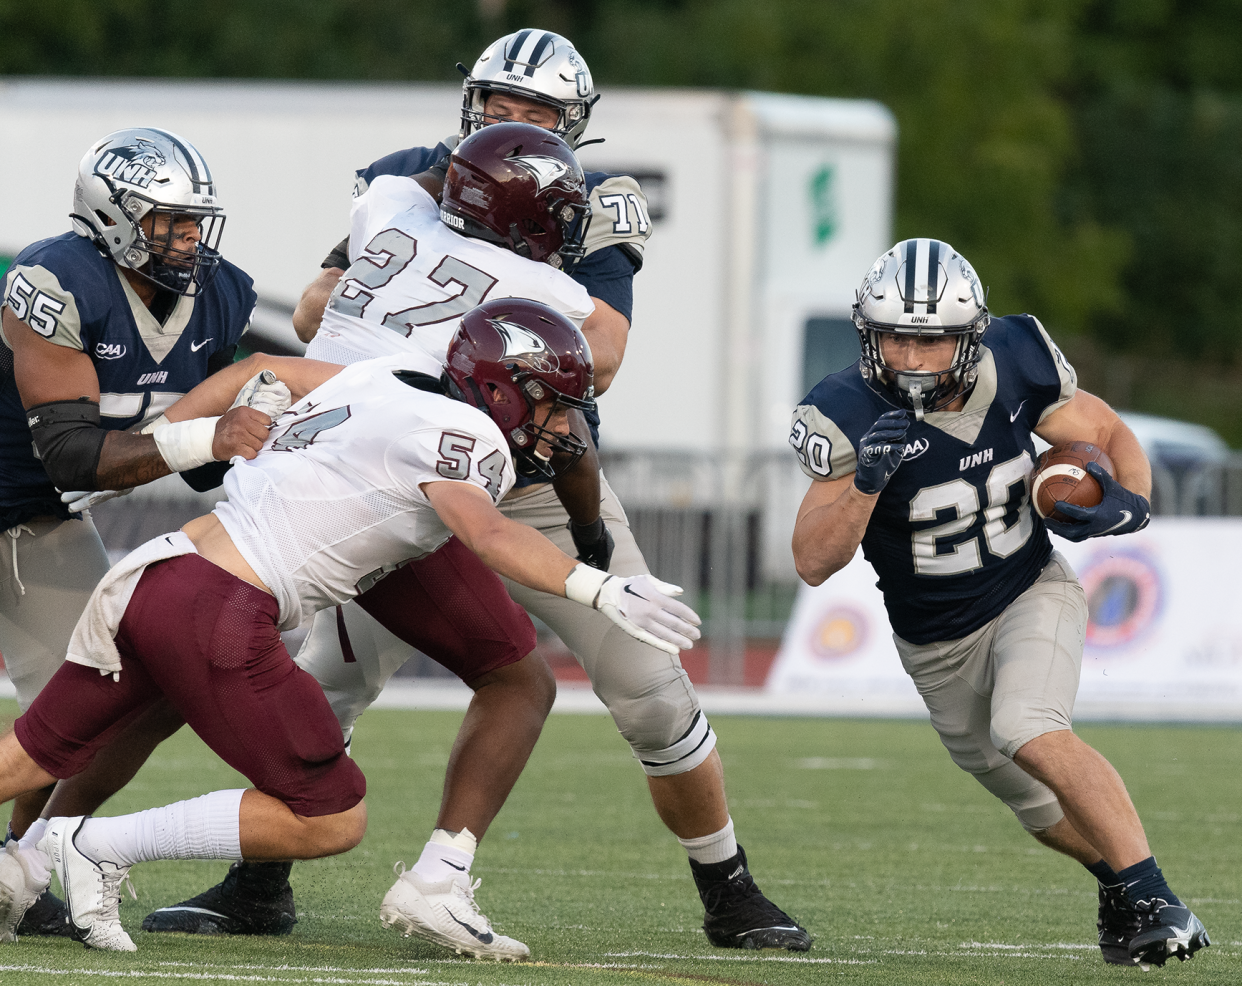 Junior running back Dylan Laube earned Colonial Athletic Association weekly honors for the second time this season, in large part for his 92-yard return of a punt for UNH’s first touchdown in last weekend's game at Towson.